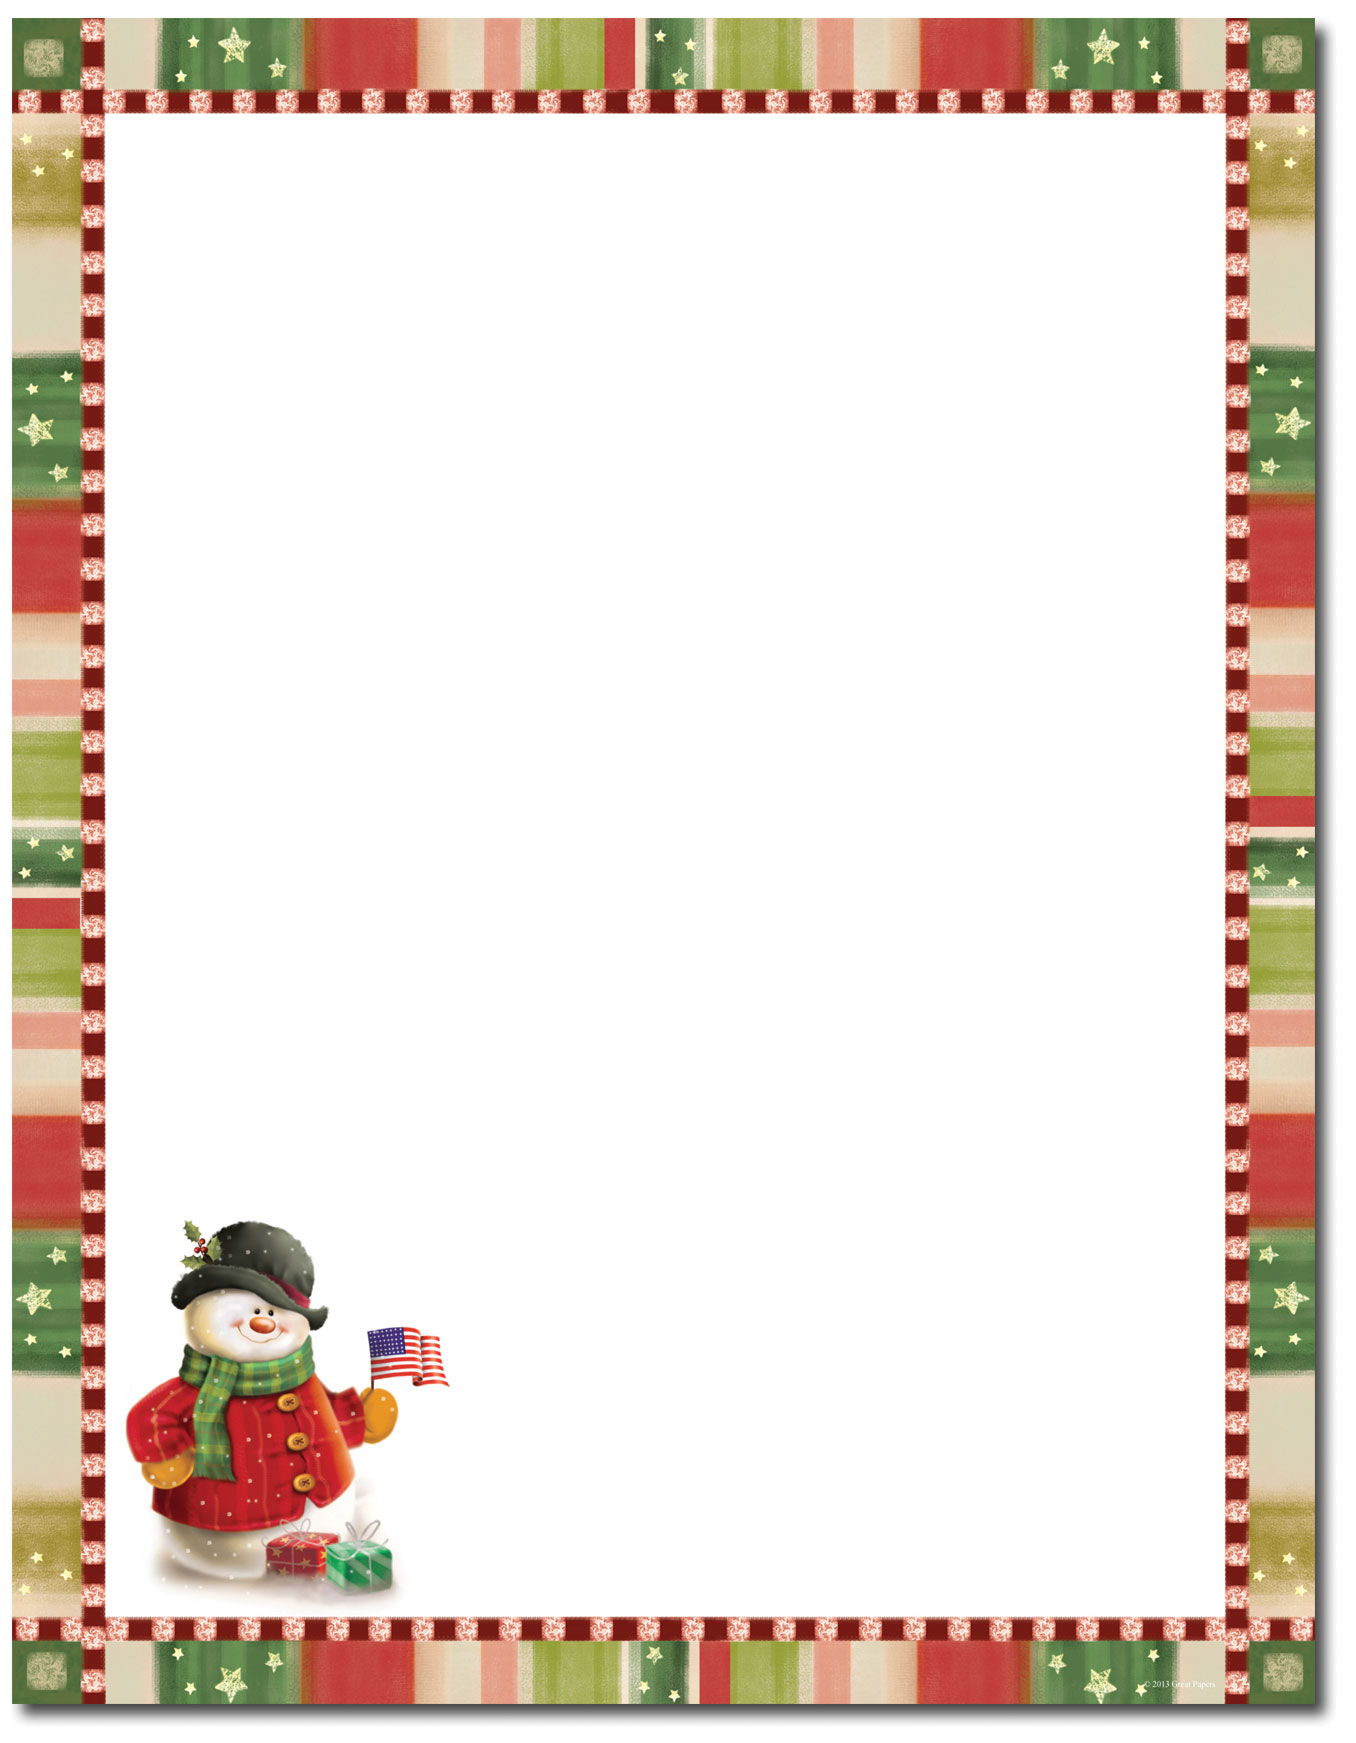 downloadable free printable christmas stationery - Clip Art Library With Regard To Christmas Letter Templates Free Printable